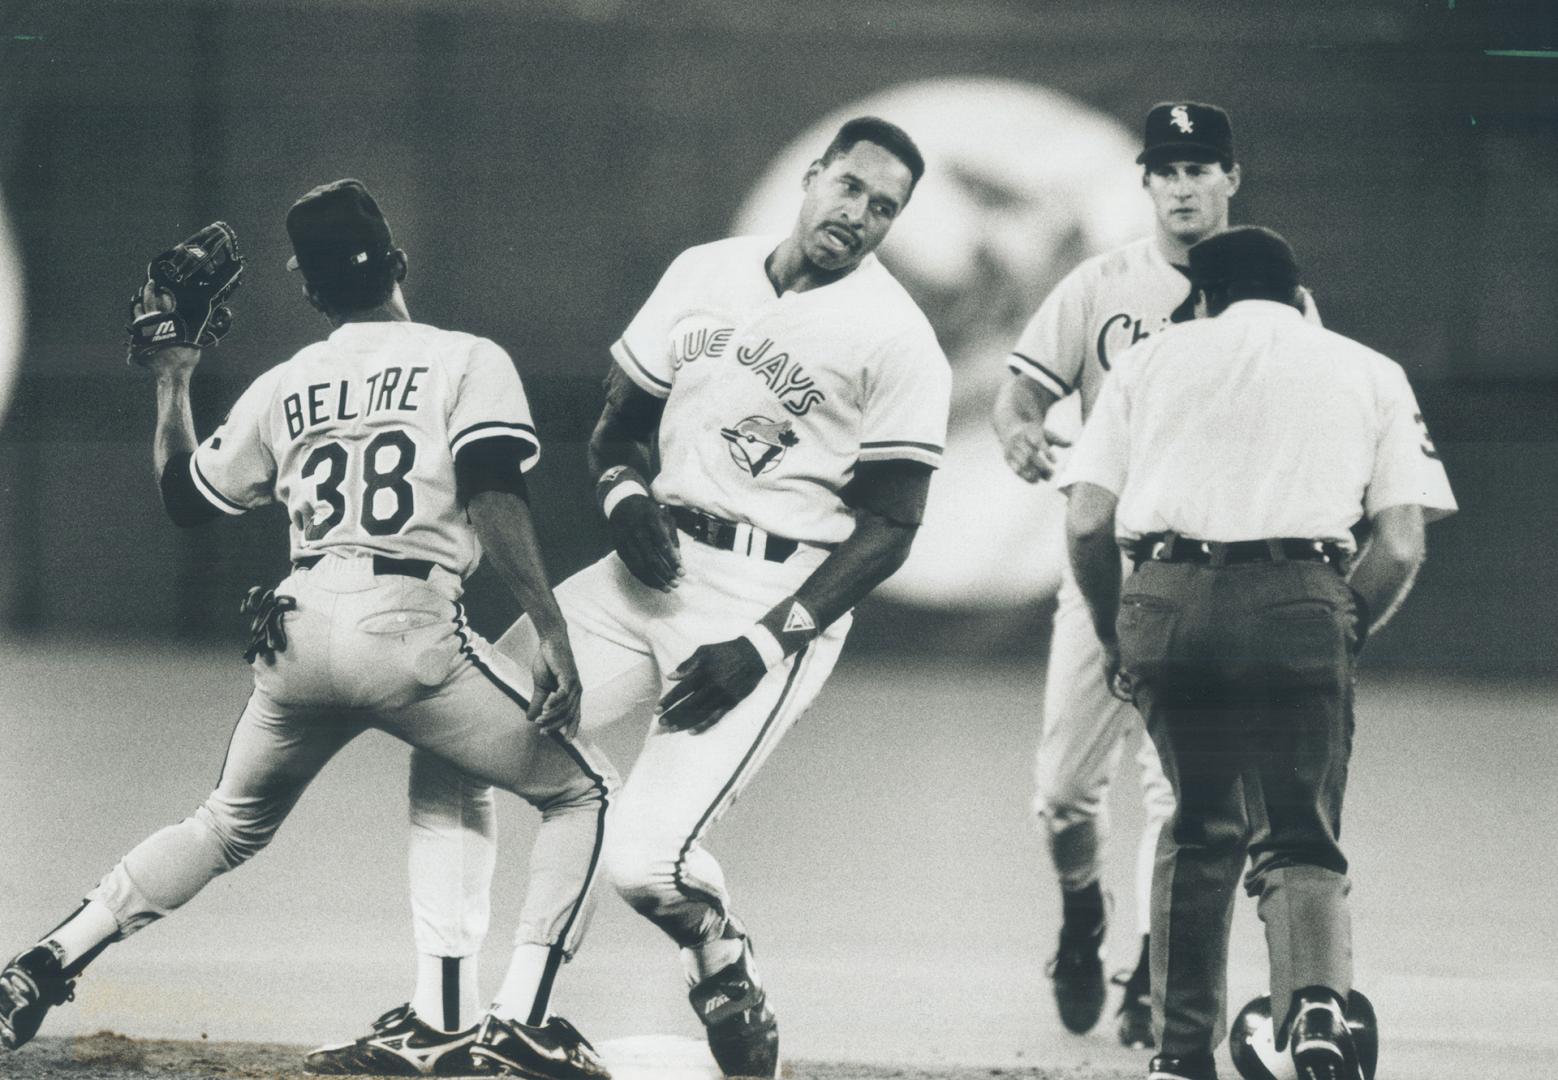 Facing the music: Jays runner Dave Winfield shows his frustration as he's greeted by Esteban Beltre after being thrown out at second in the fourth Inning